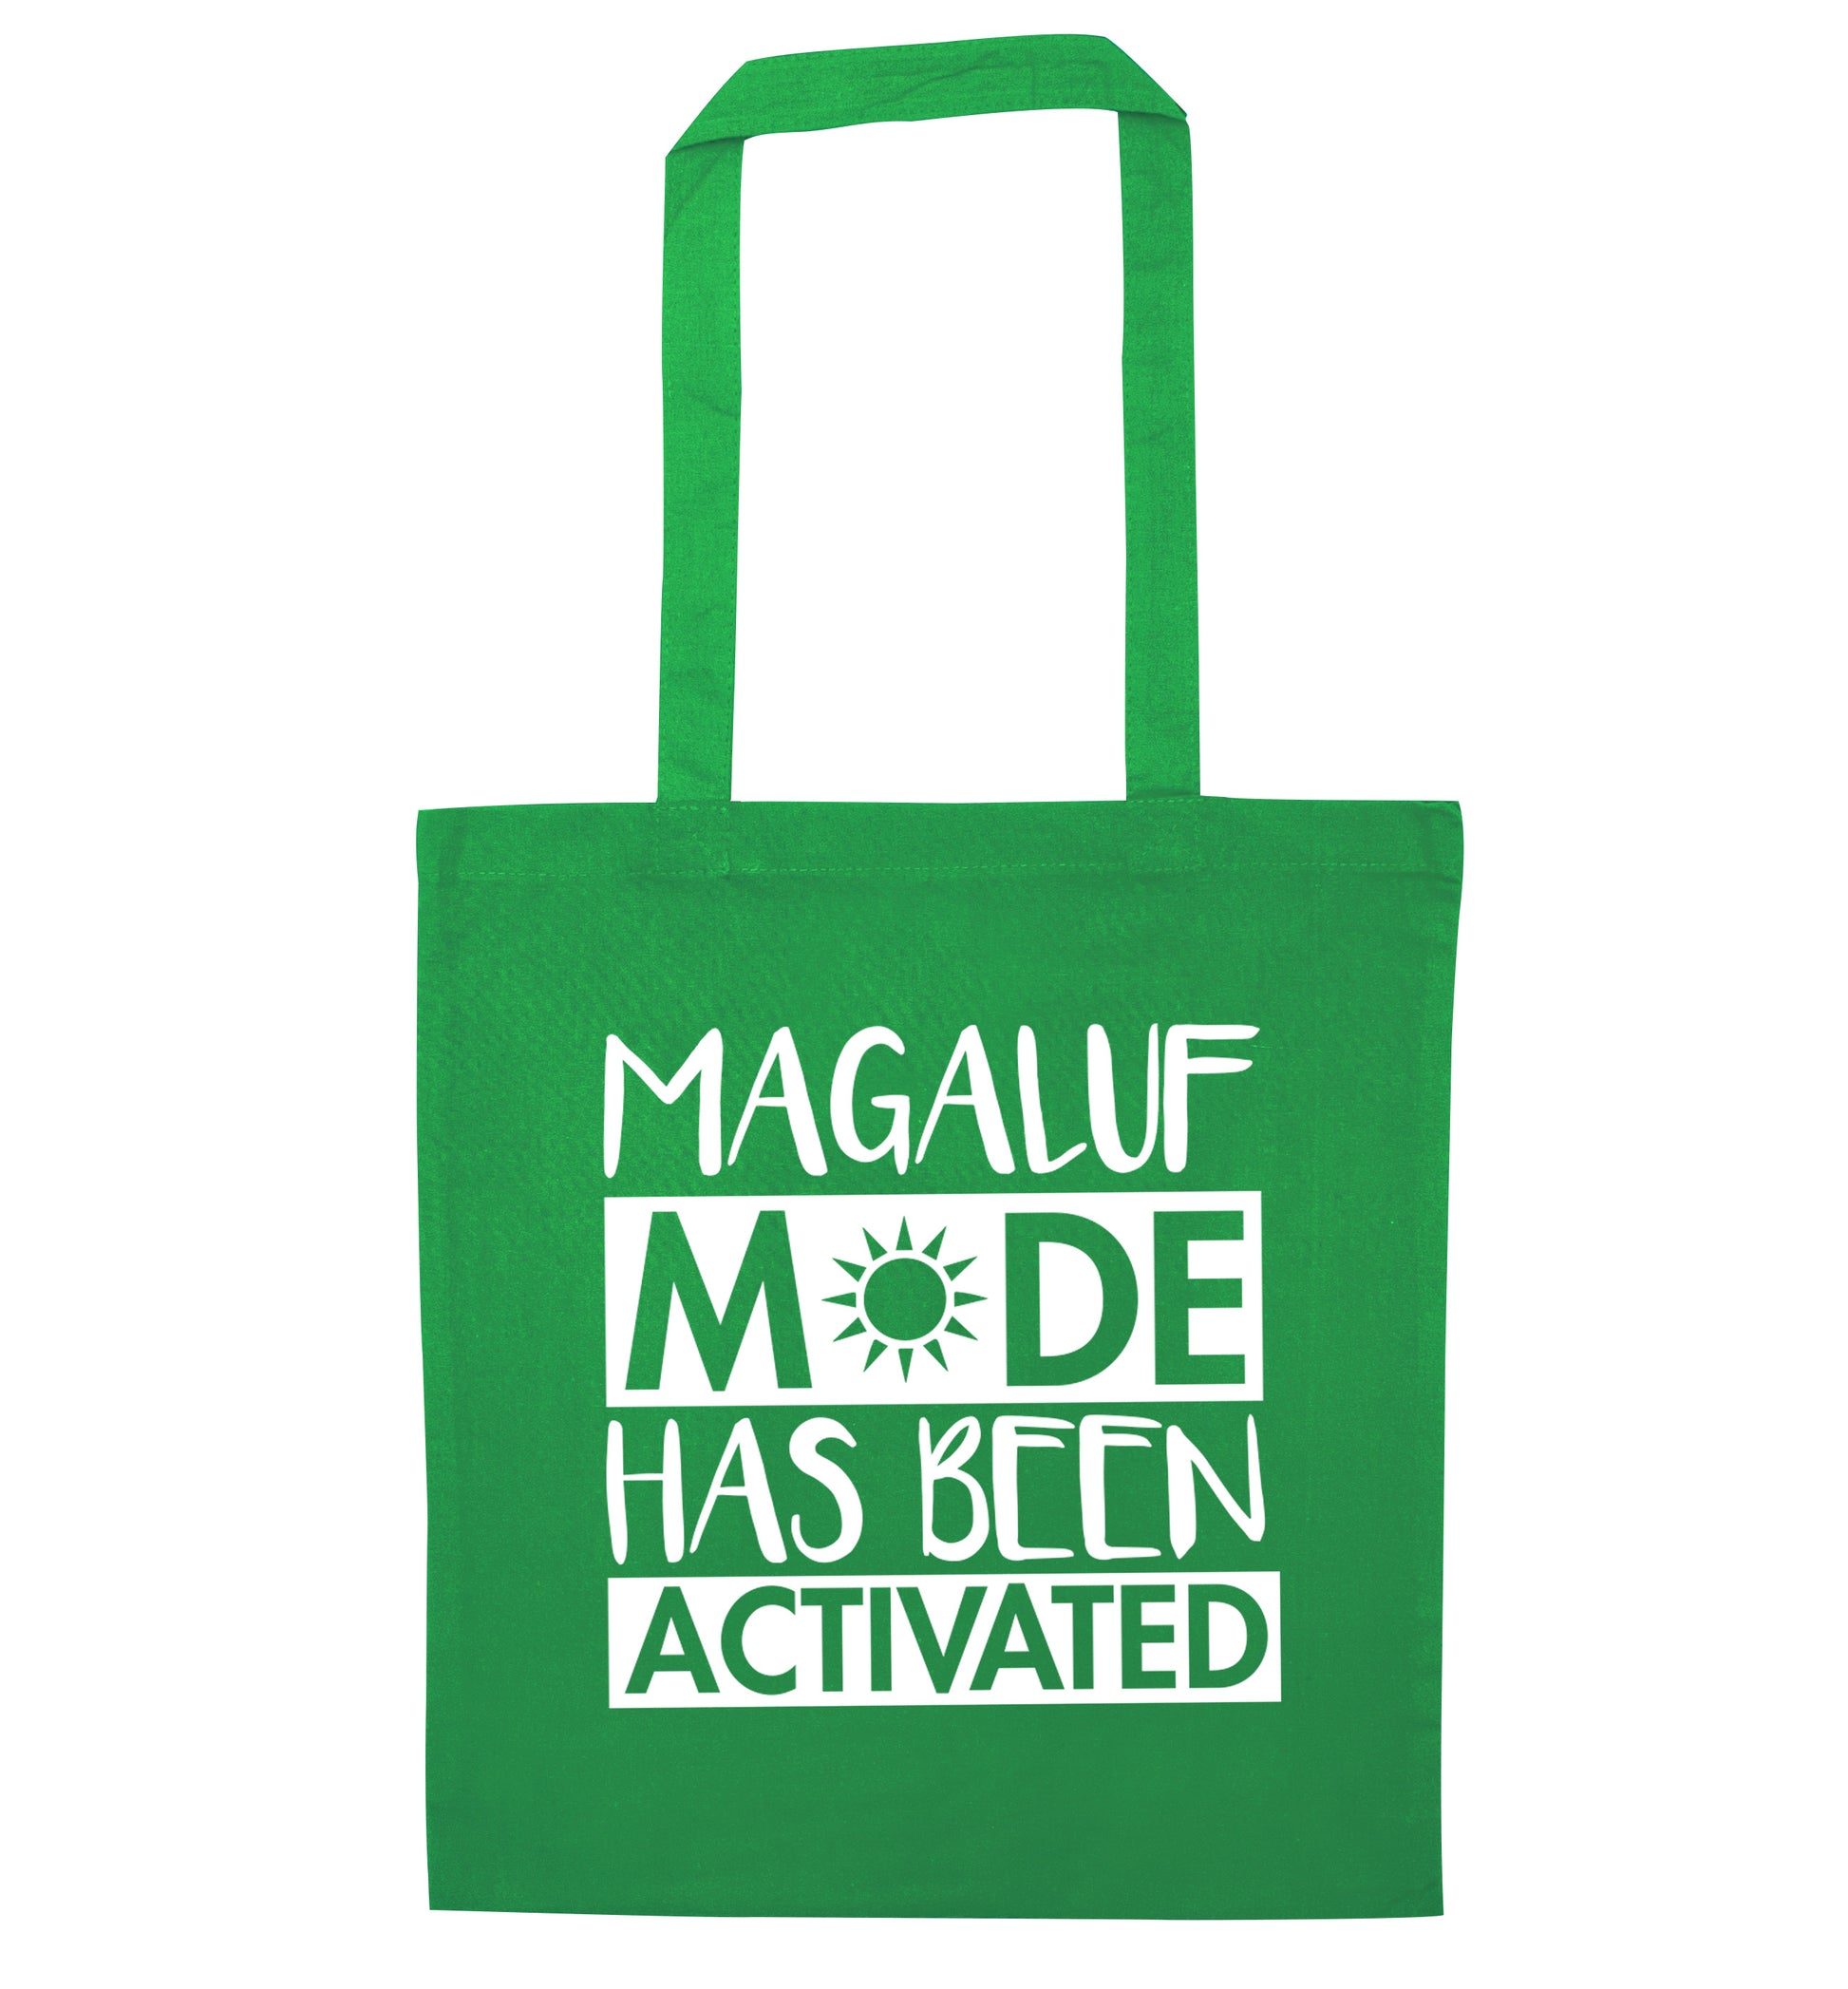 Magaluf mode has been activated green tote bag